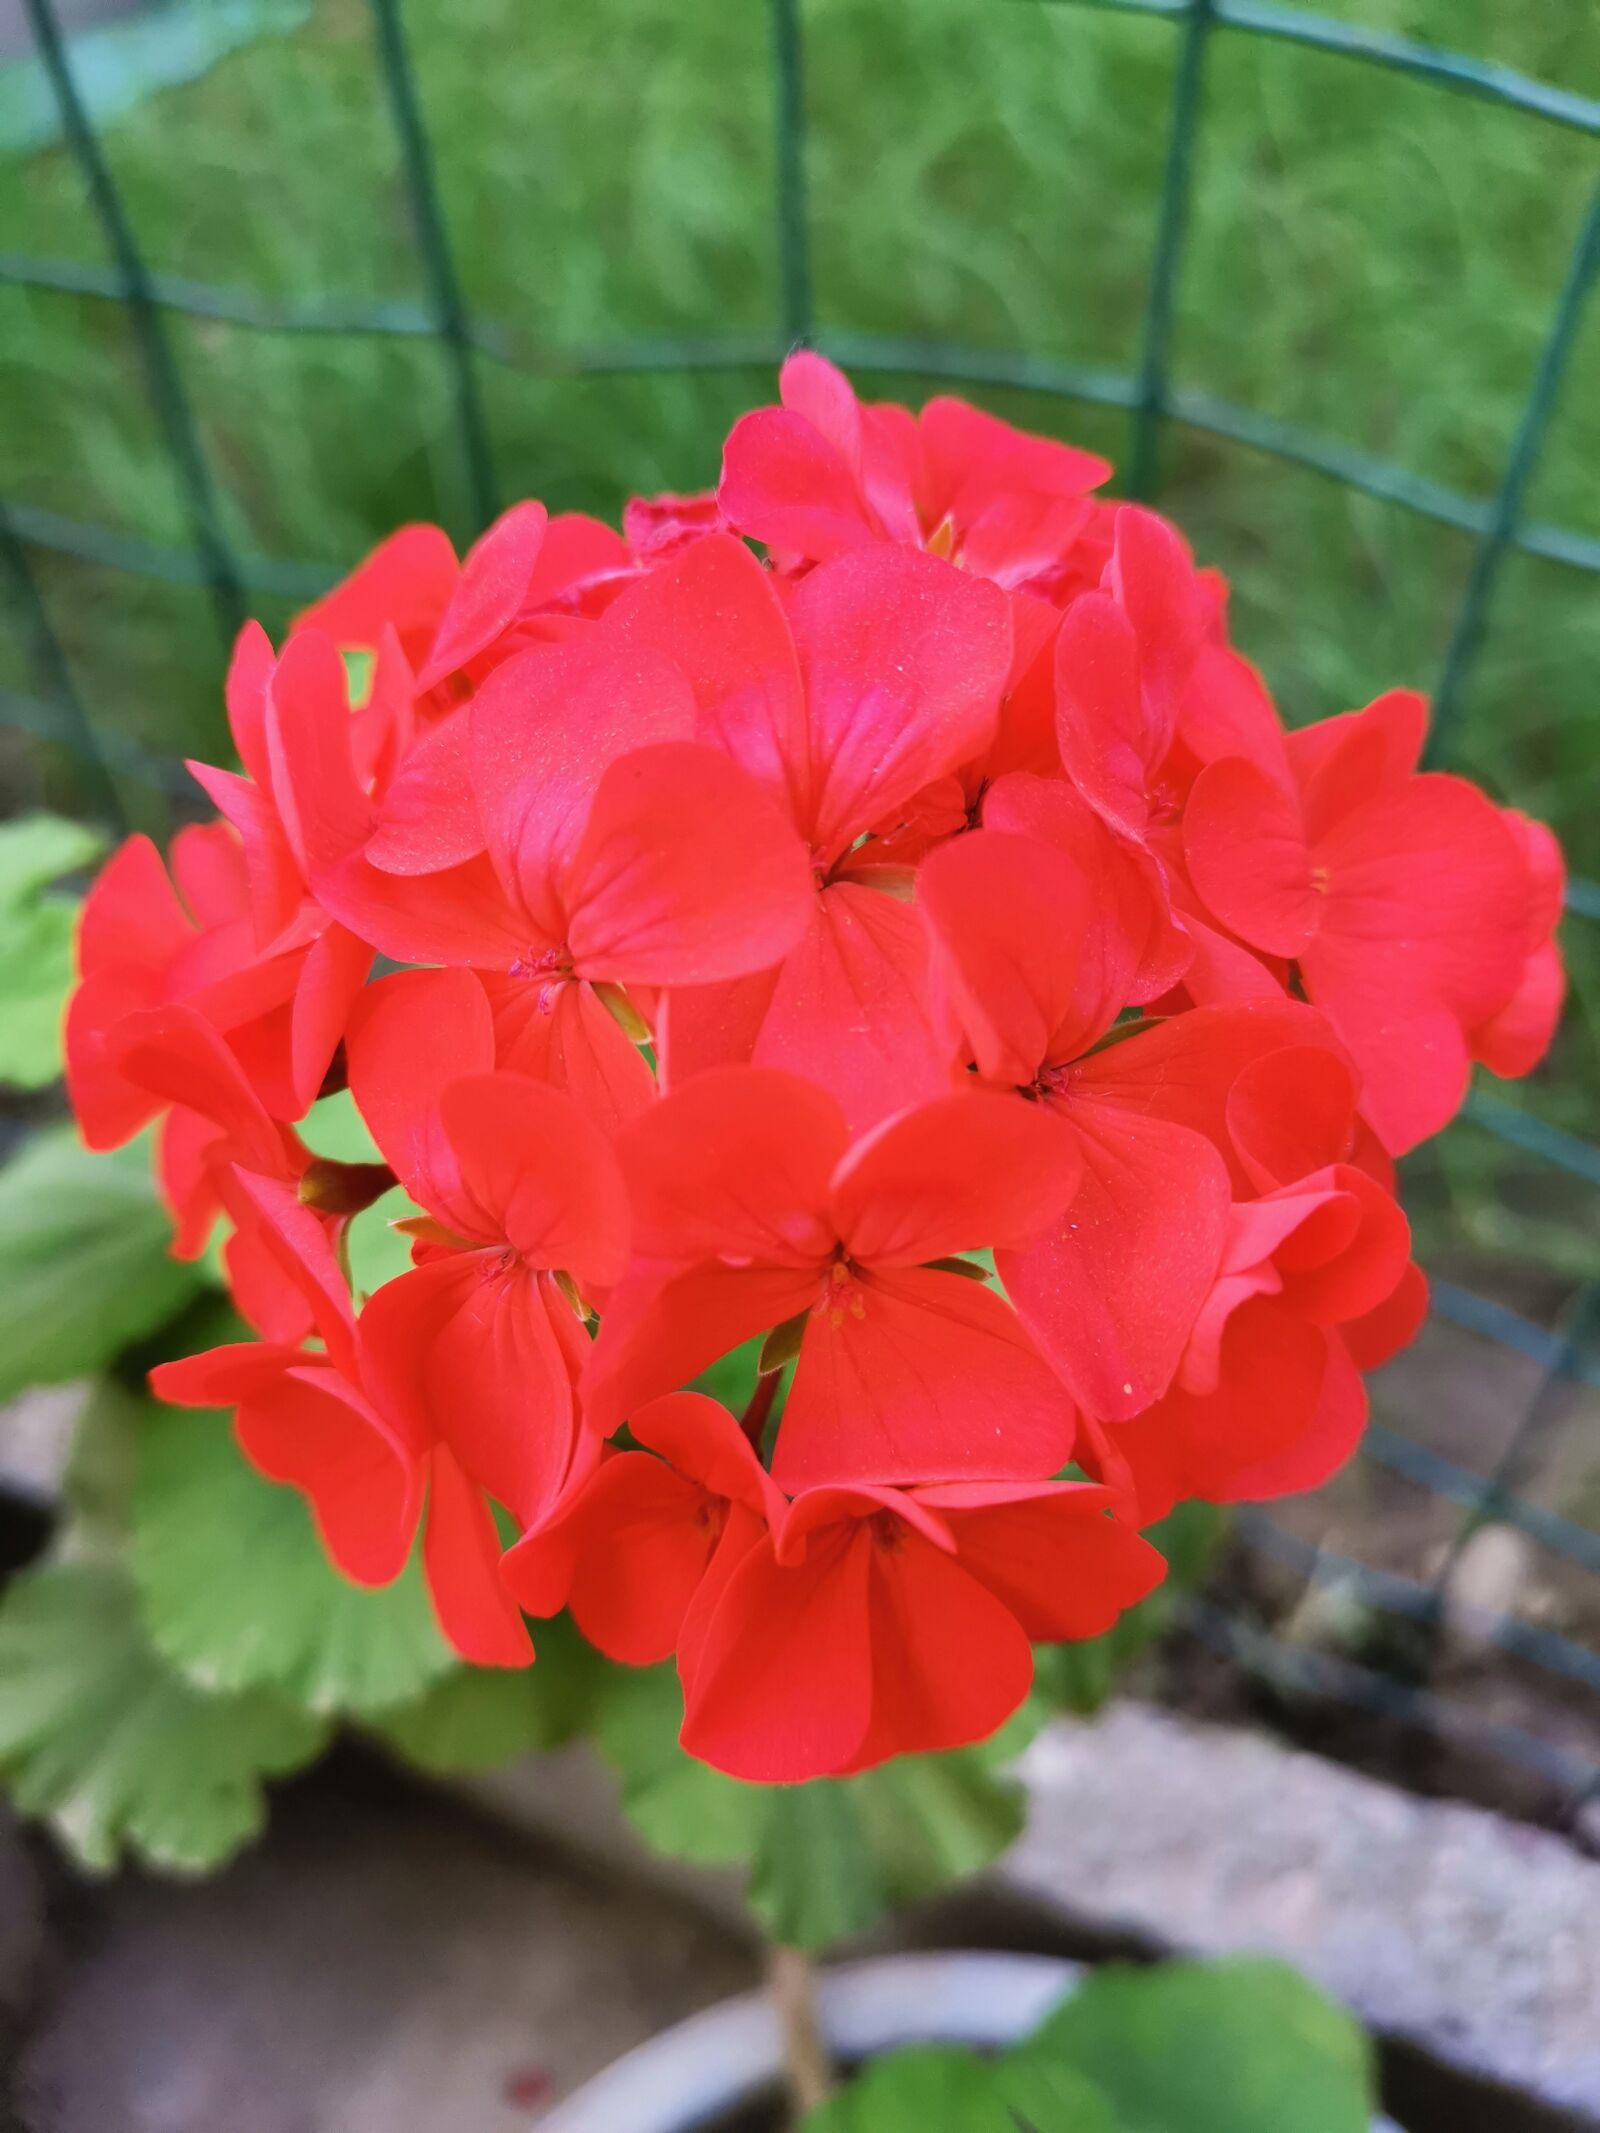 HUAWEI Mate 20 Pro sample photo. Geranium, flower, red flowers photography